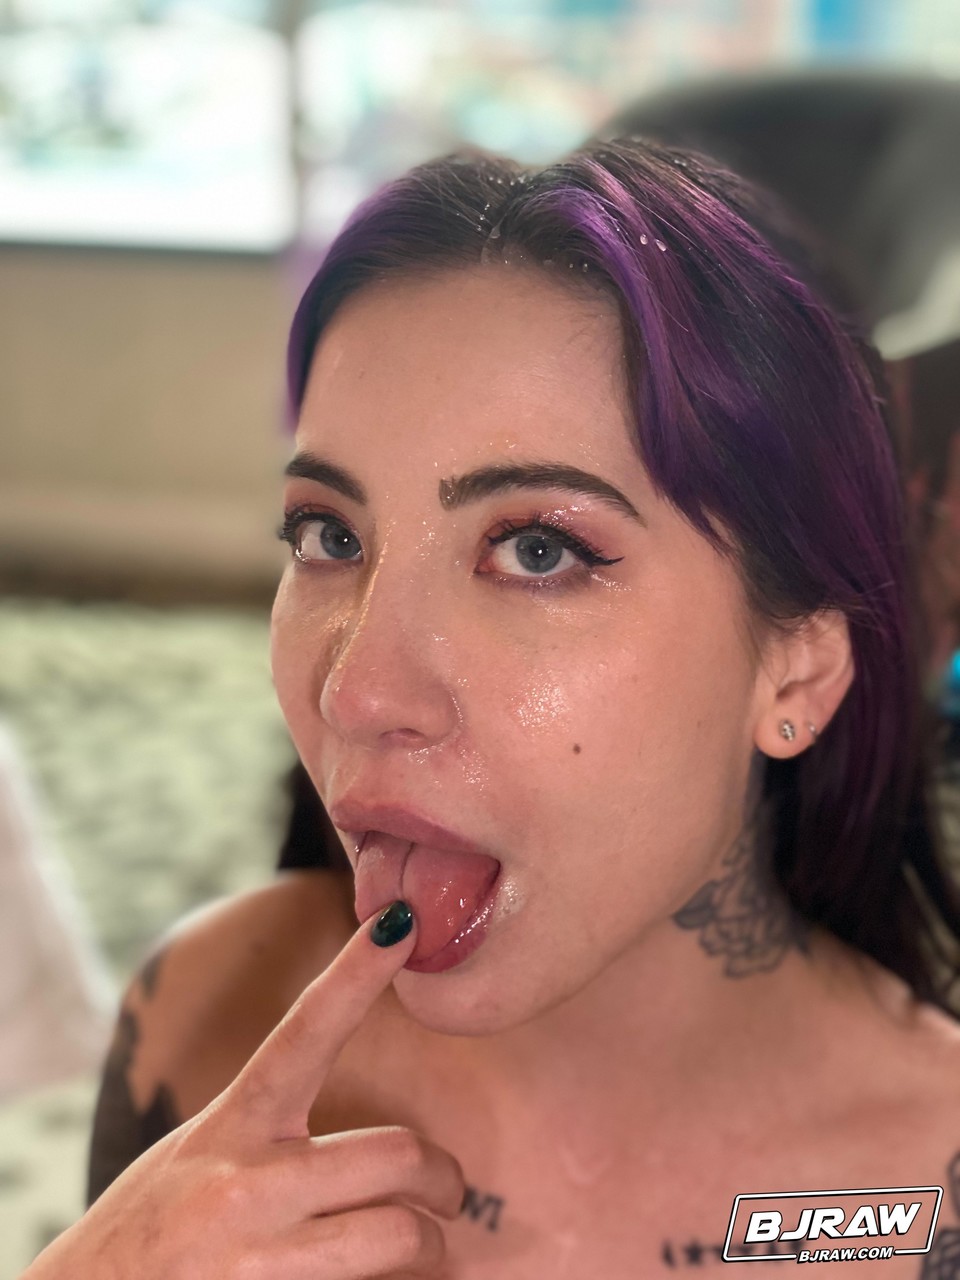 Brunette babe with tattoos Charlotte Sartre takes a dick in her mouth porno fotky #424561435 | BJ Raw Pics, Charlotte Sartre, Tattoo, mobilní porno